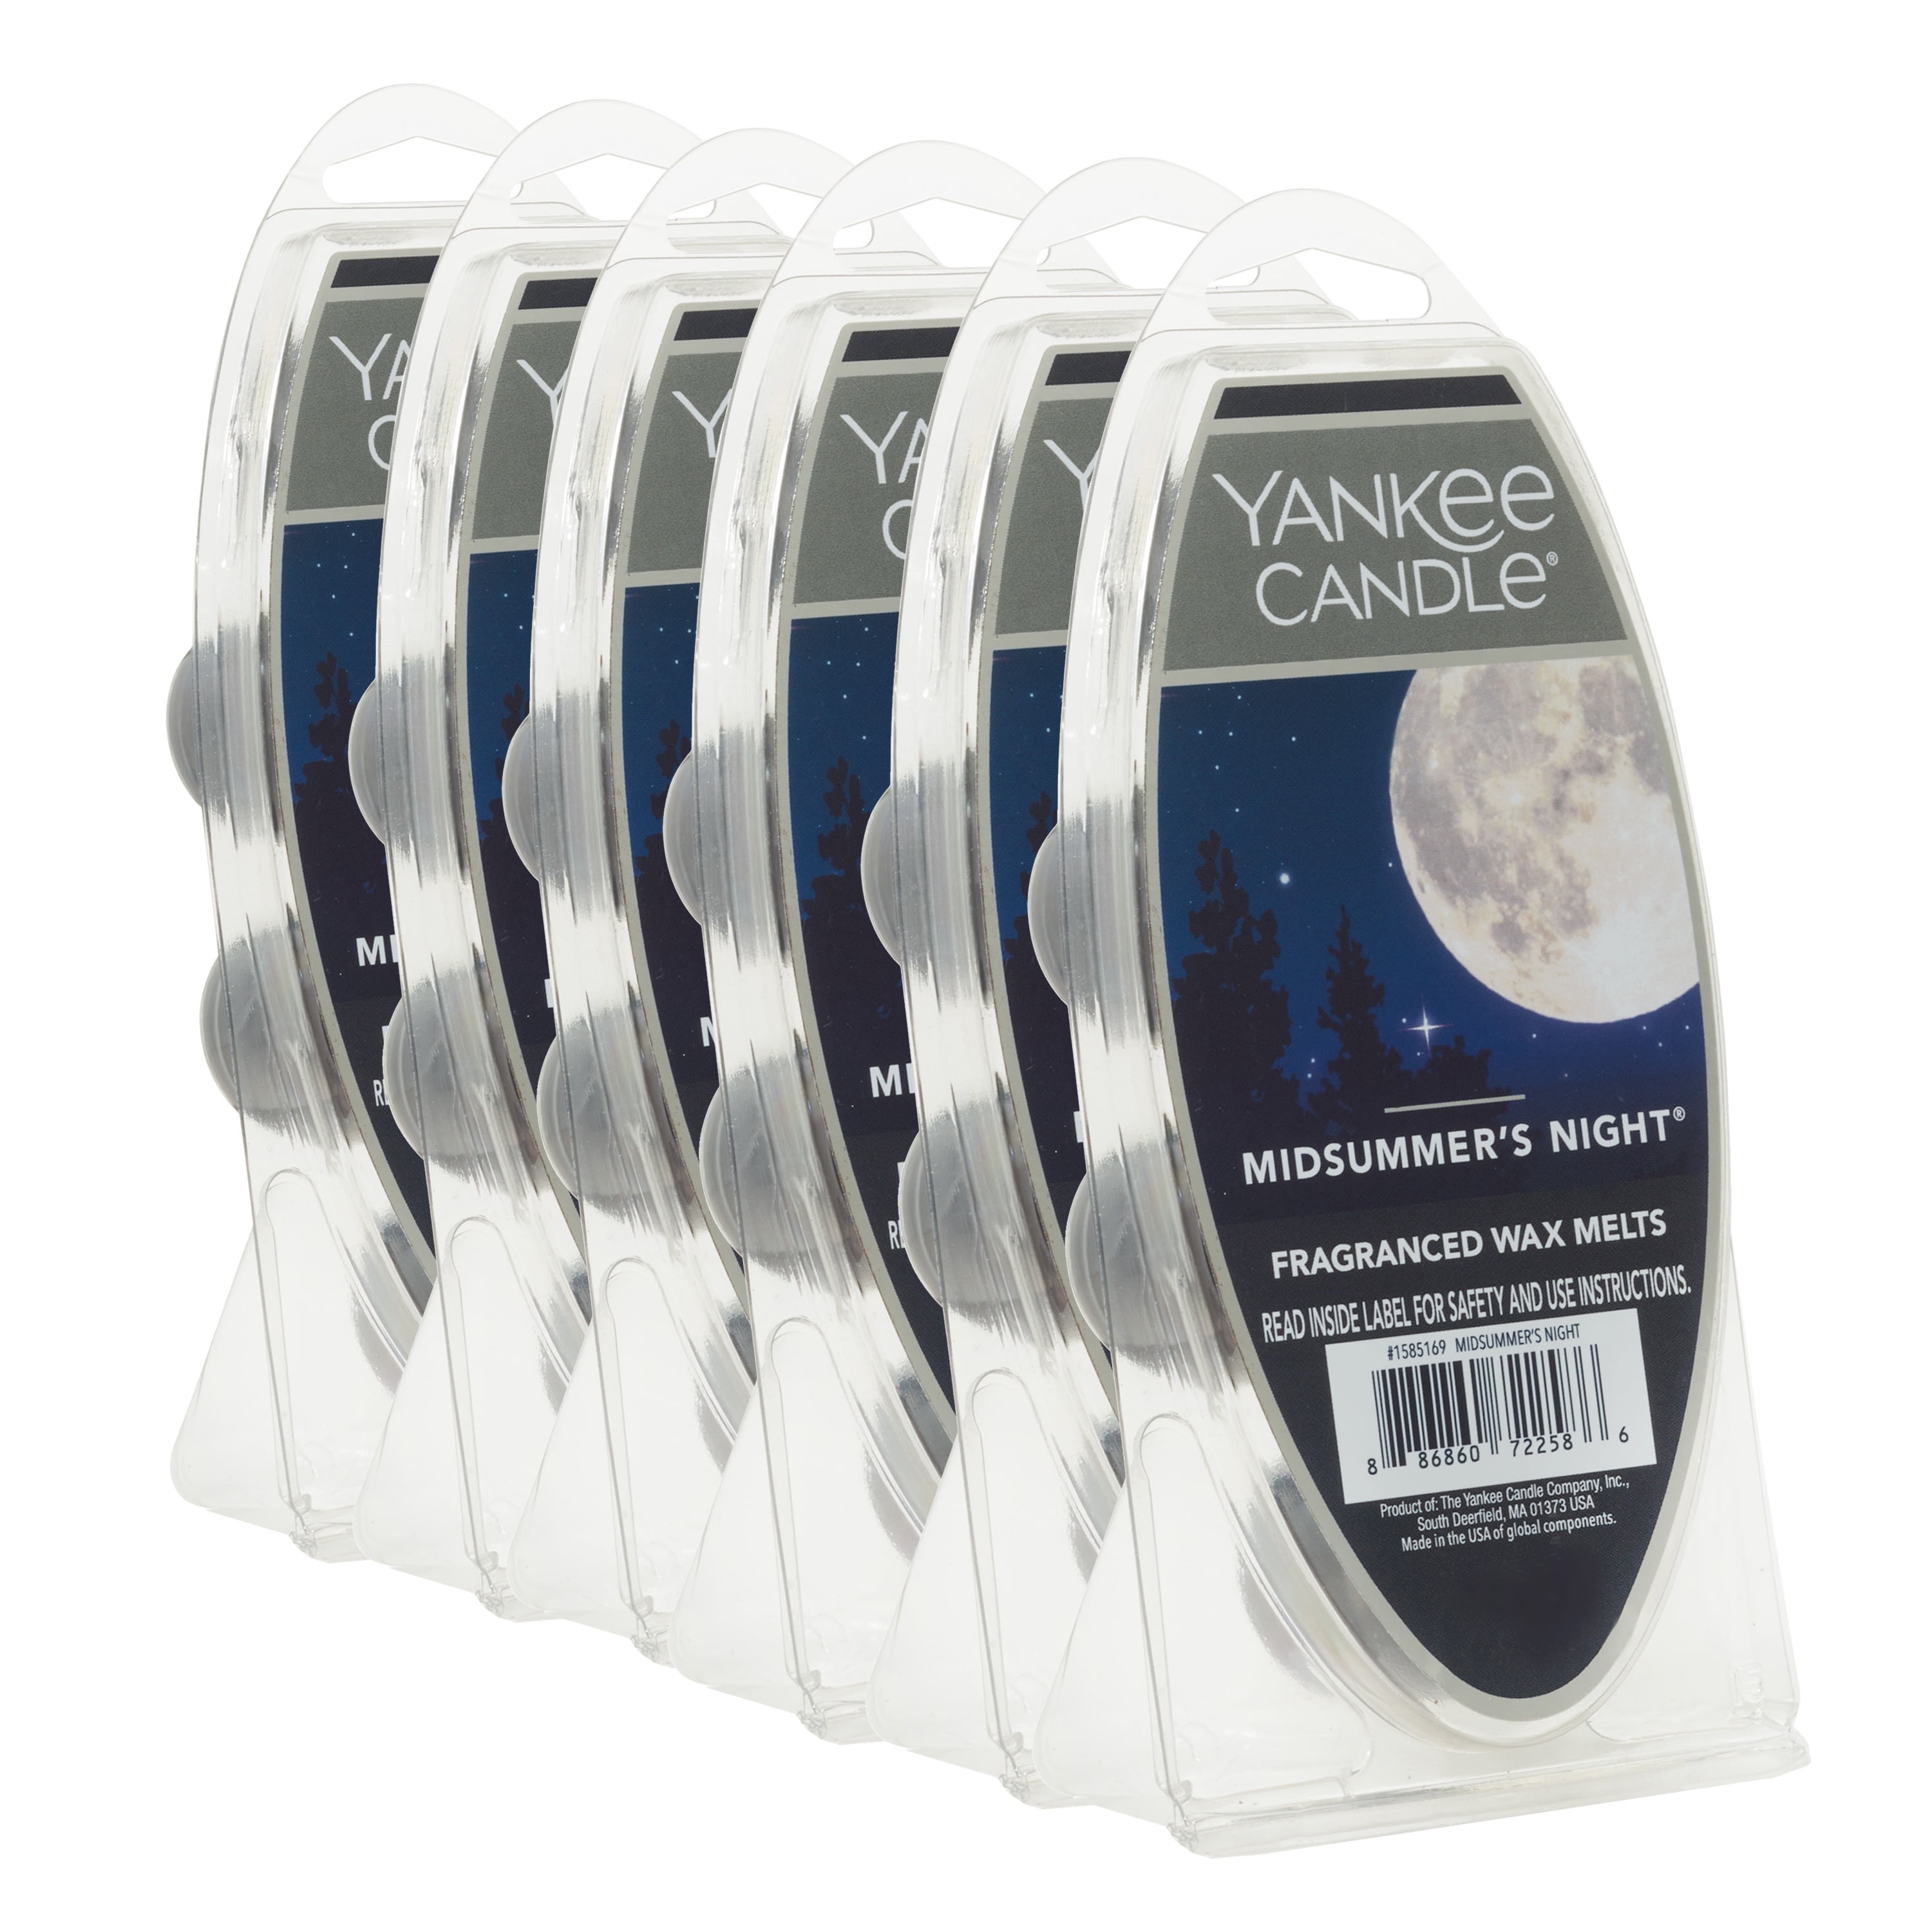 Yankee Candle Midsummer's Night Wax Melts - Scented Wax